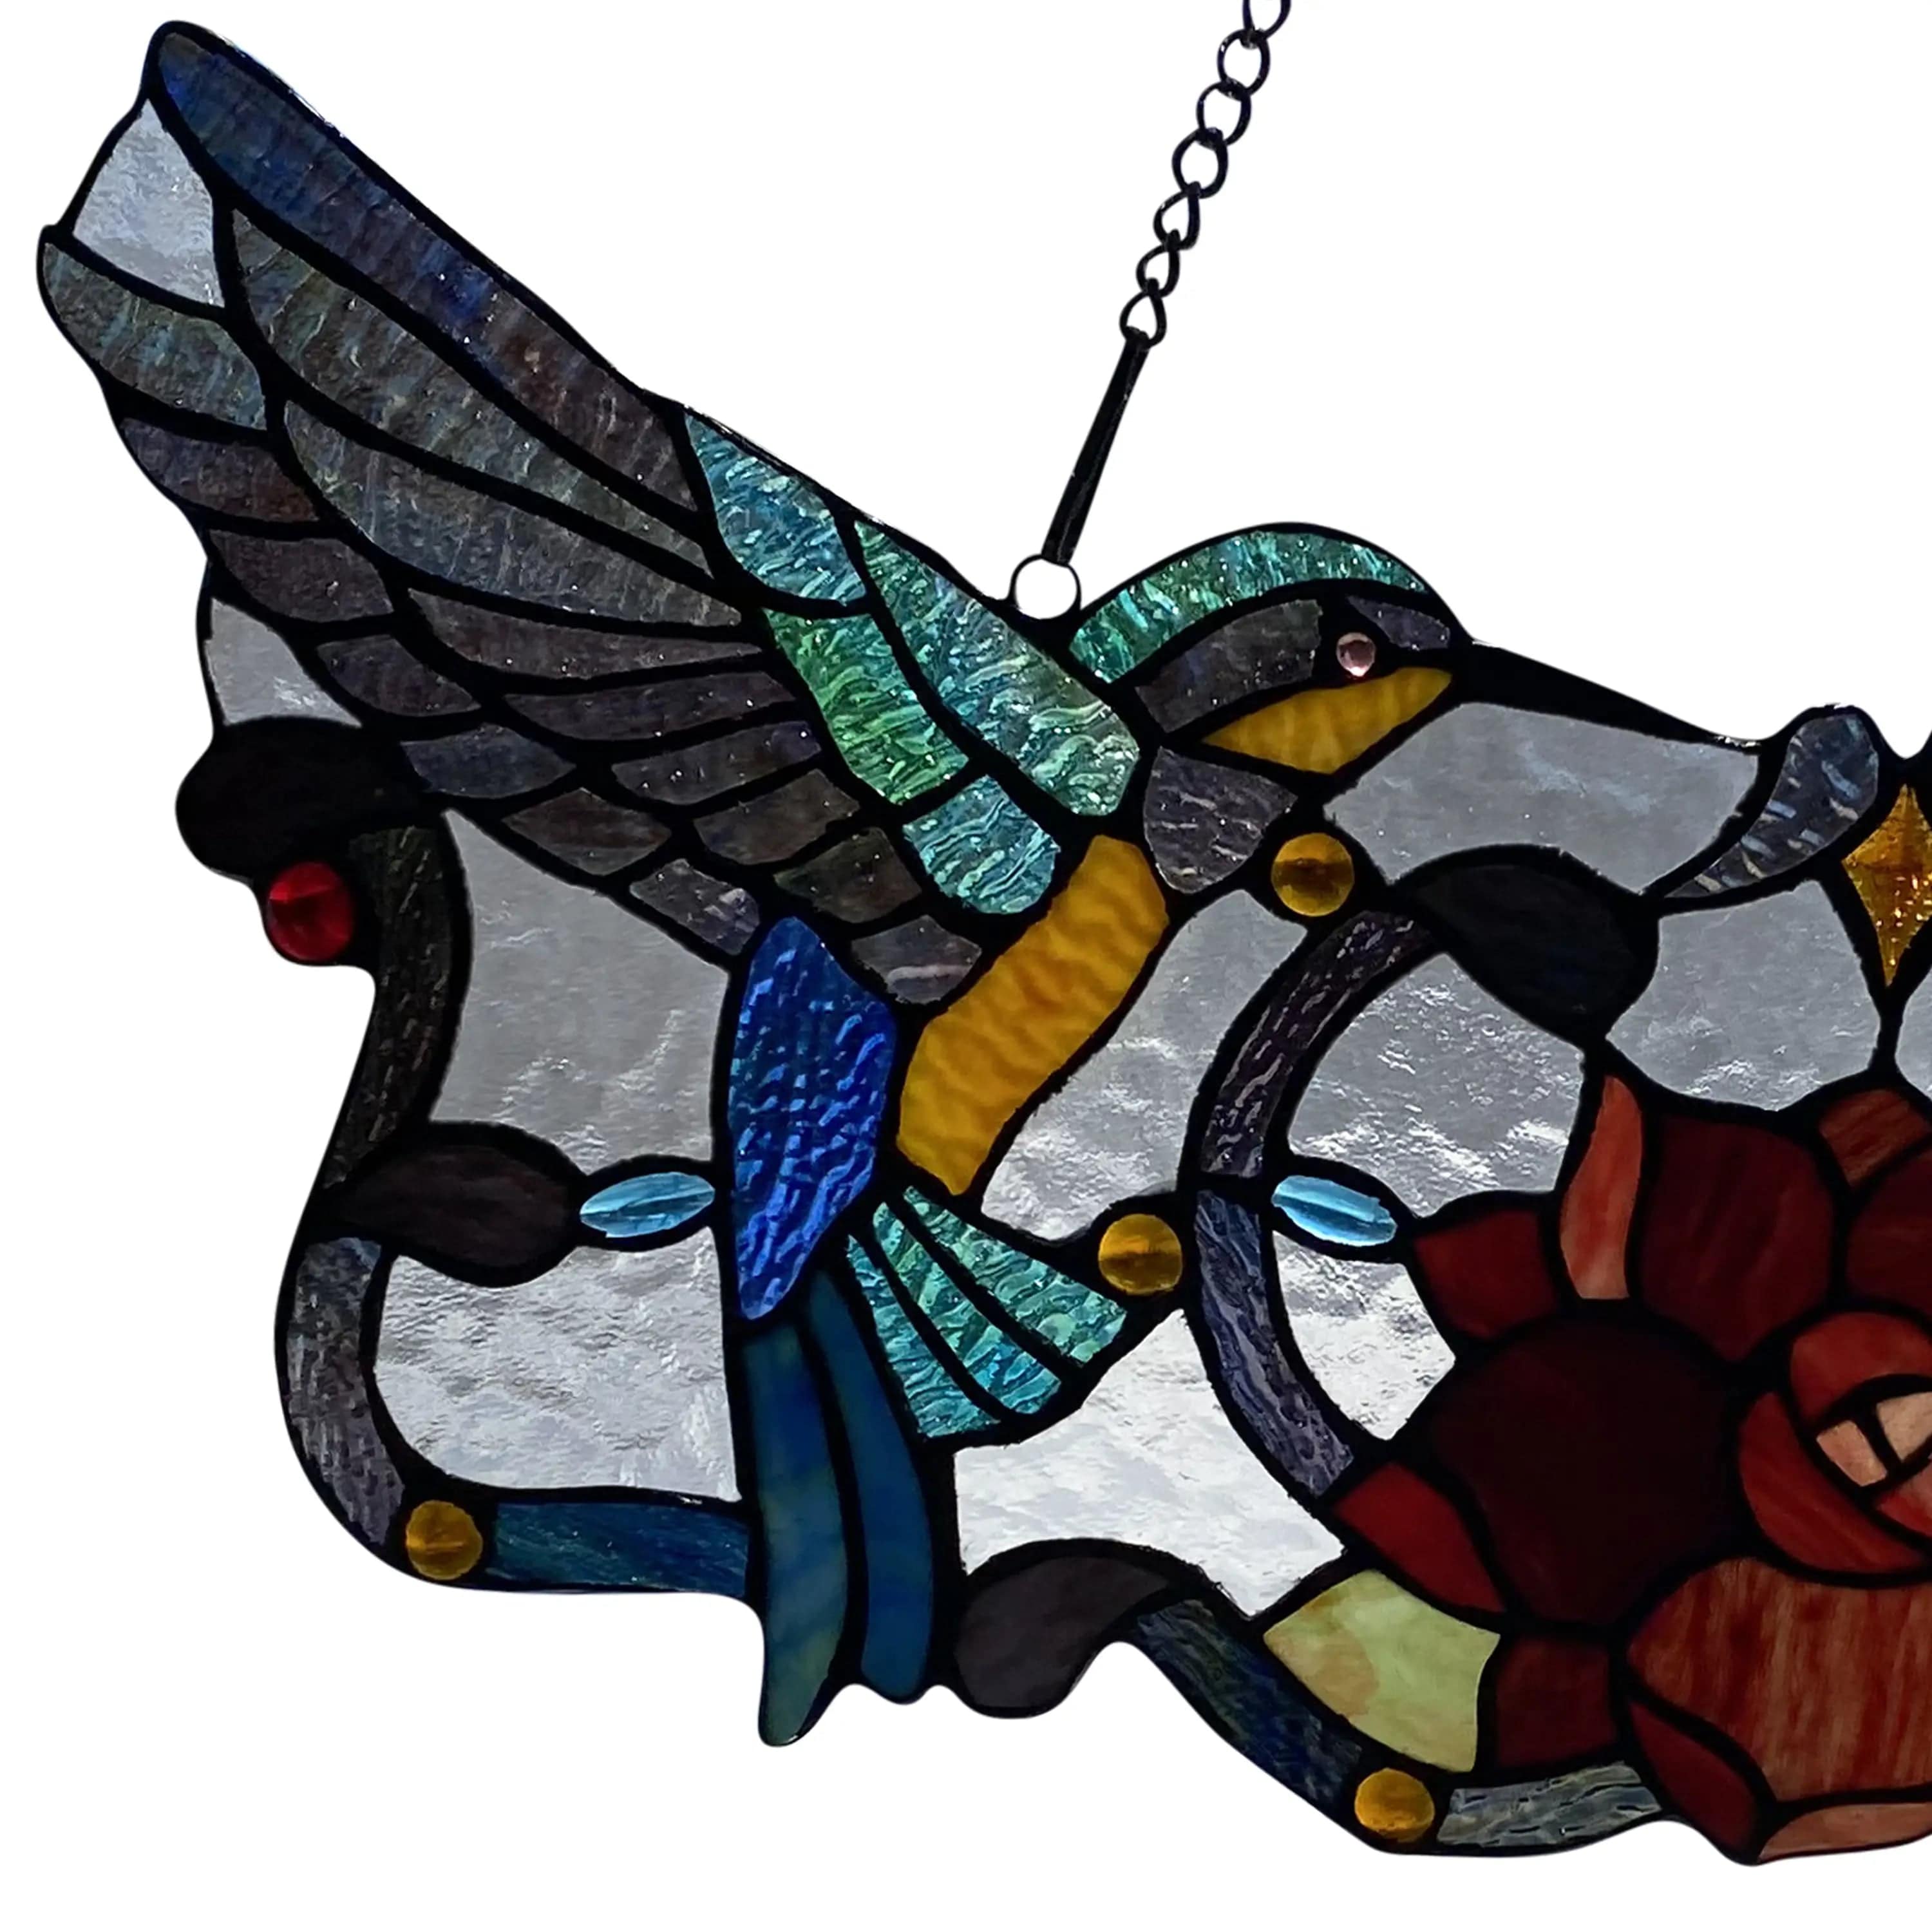 Hummingbird Floral REAL Stained Glass Window Panel